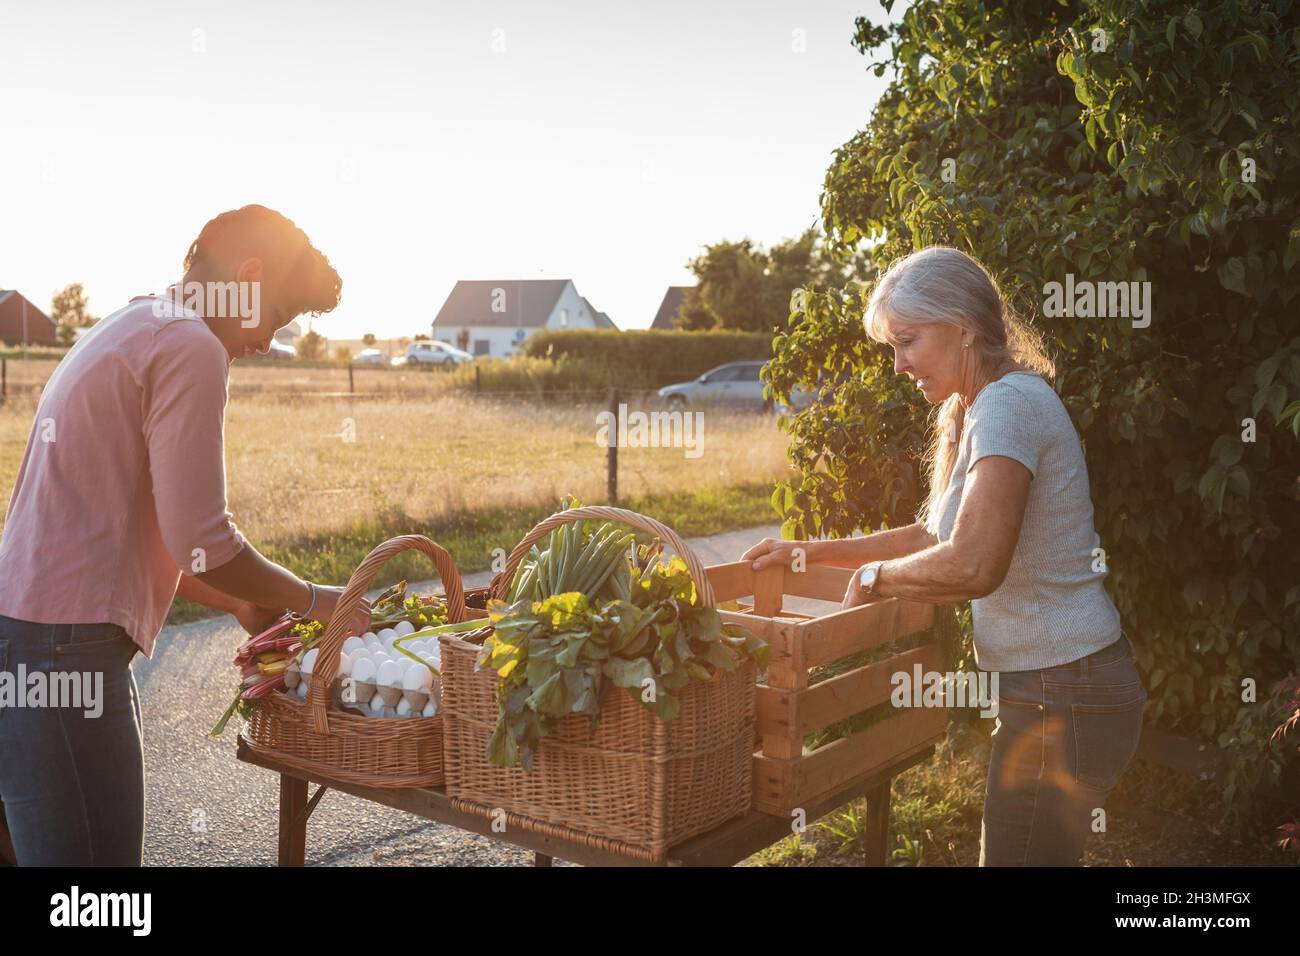 Female farm workers arranging vegetable on market stall at roadside Stock Photo